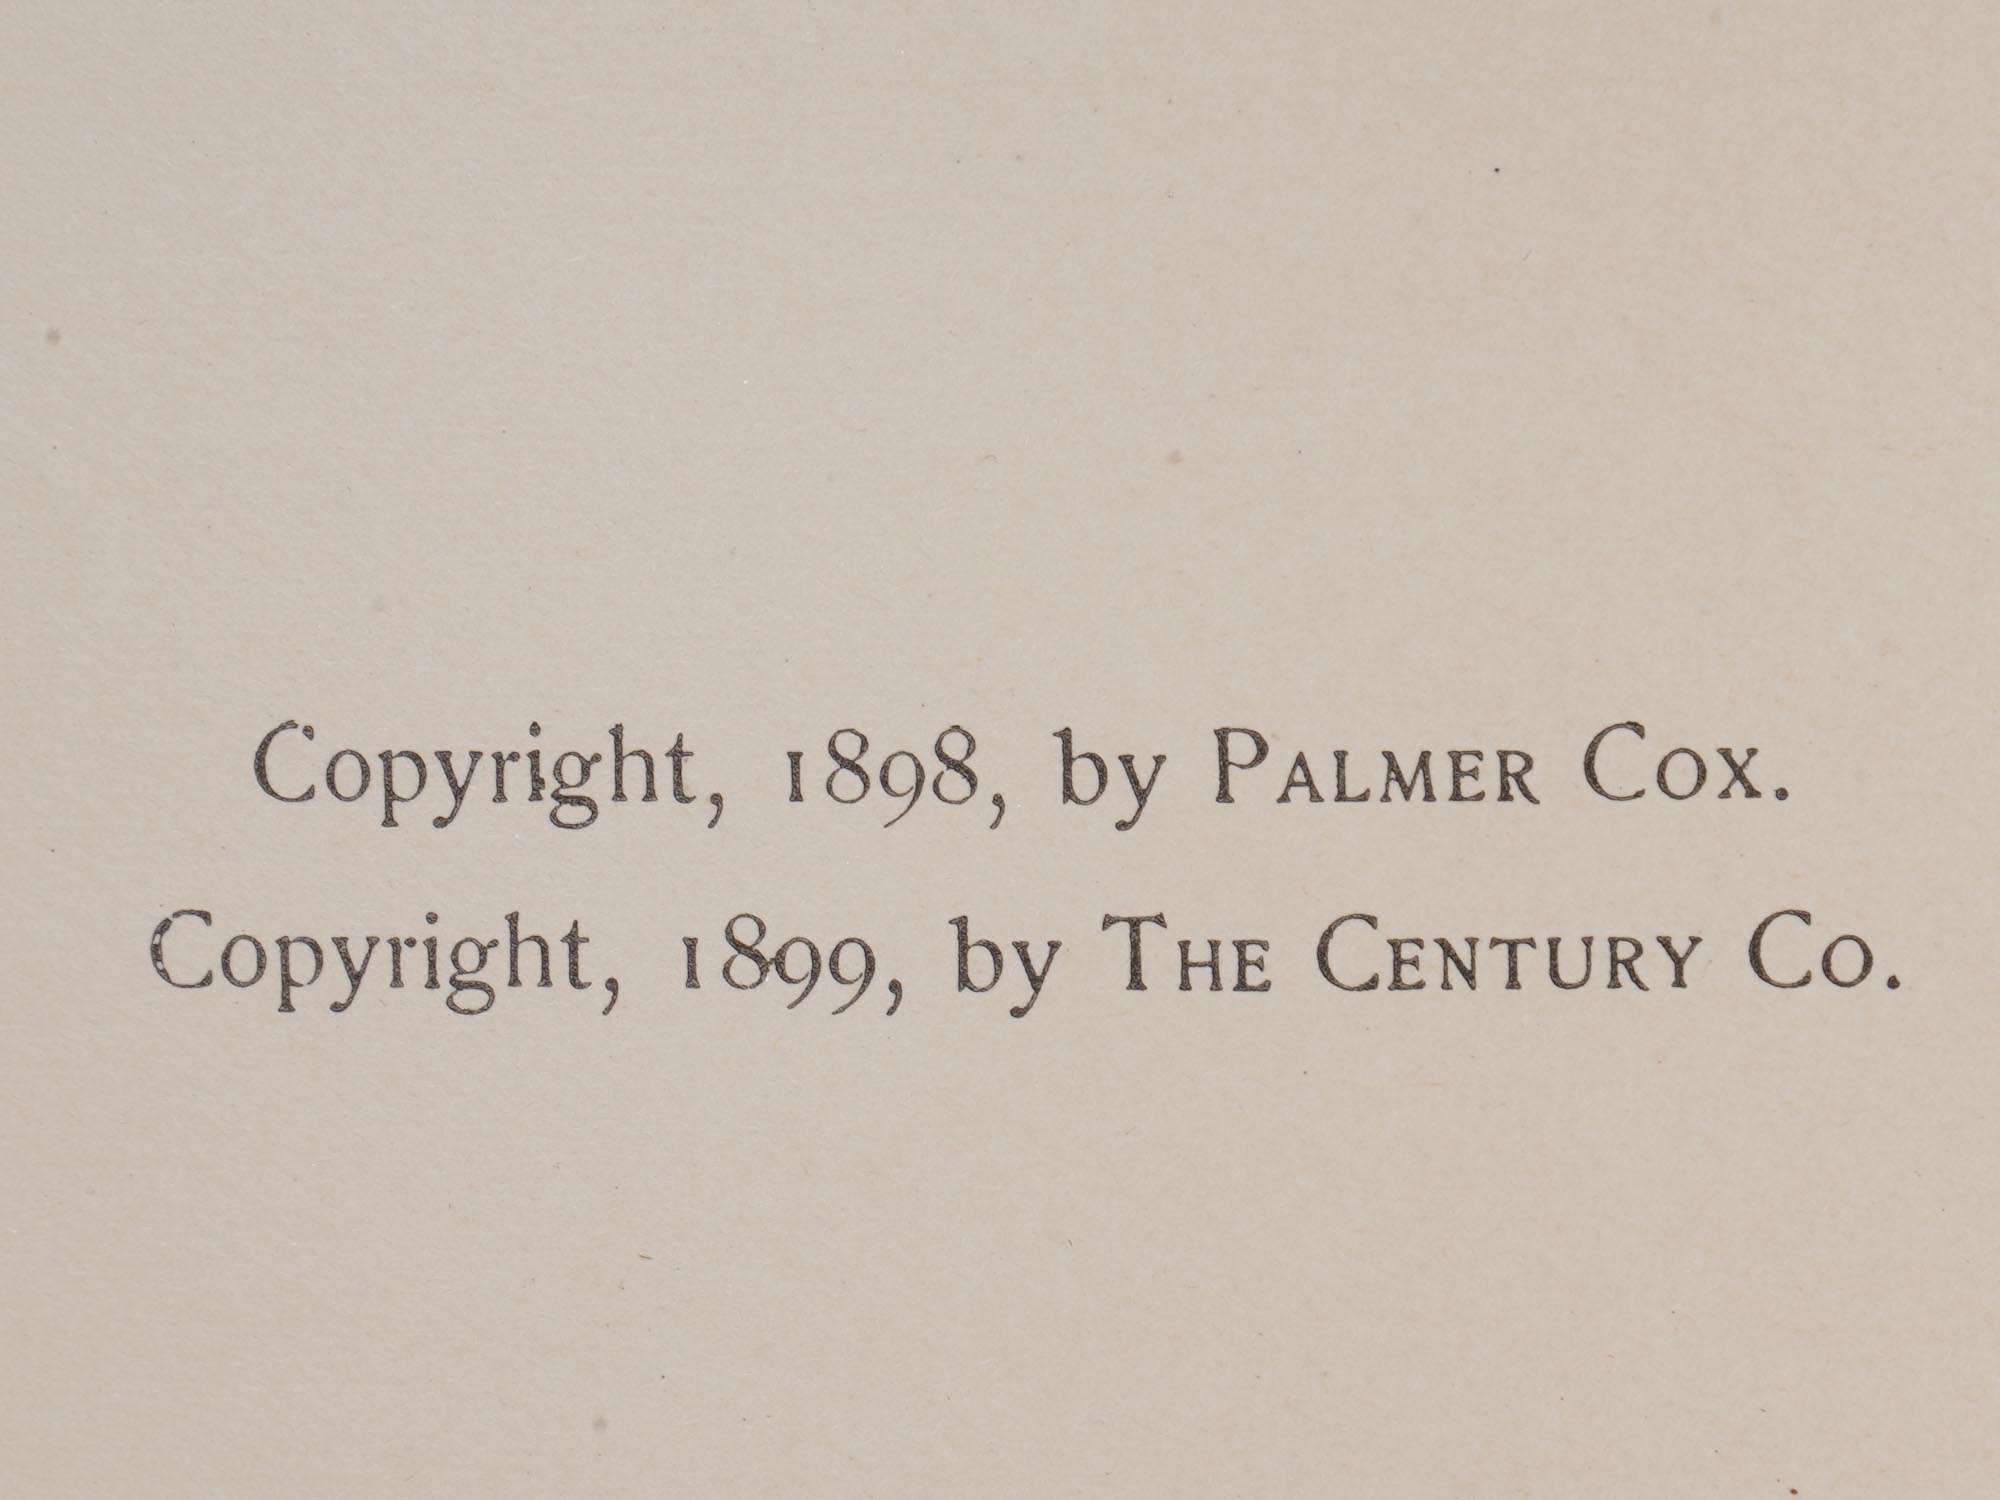 THE BROWNIES BOOKS BY PALMER COX FIRST EDITION PIC-5